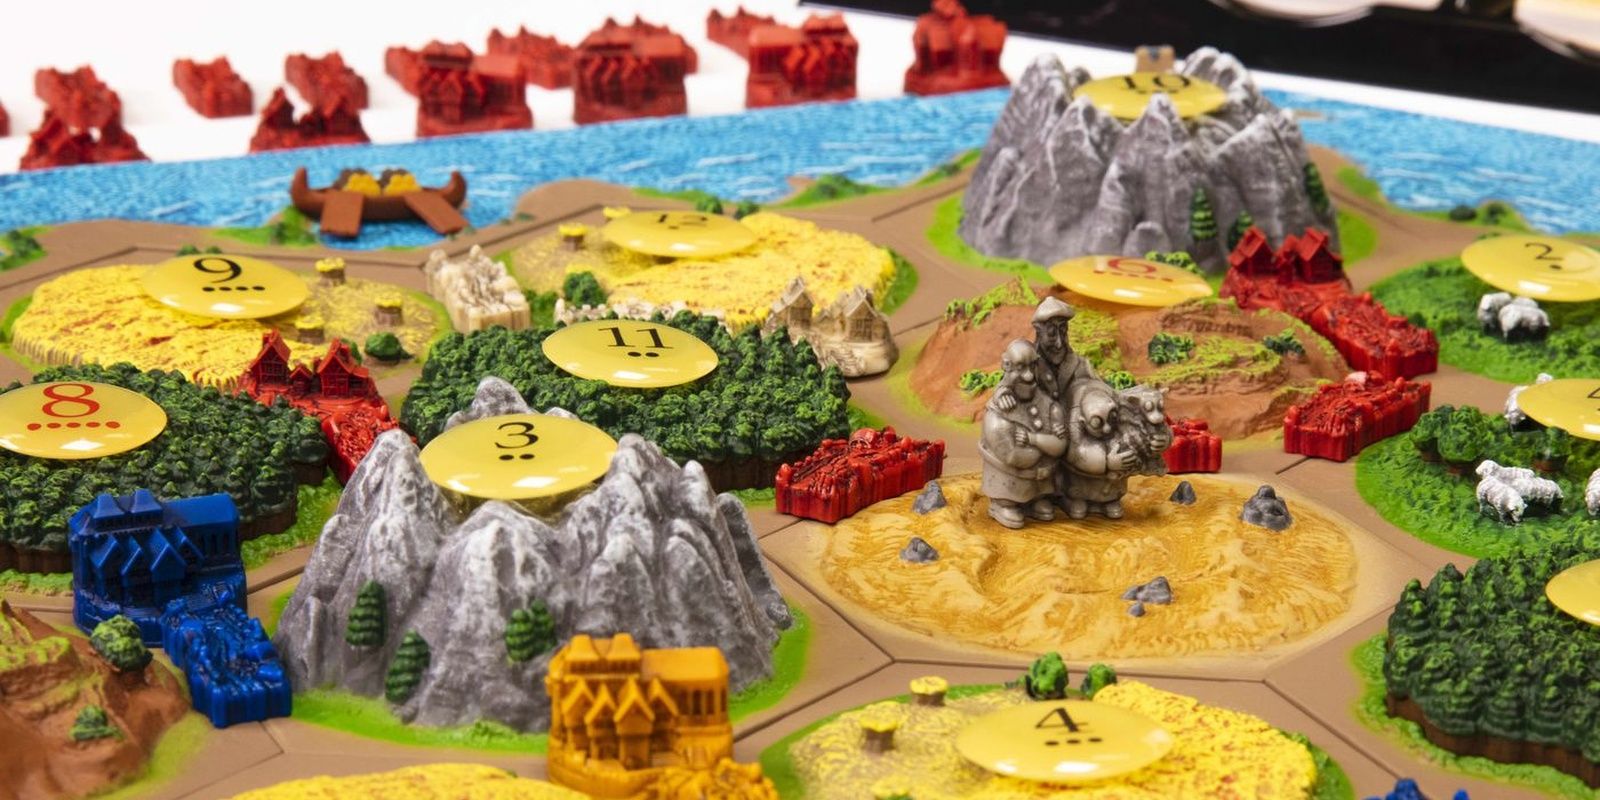 Catan 3D Edition board game being played on the table.